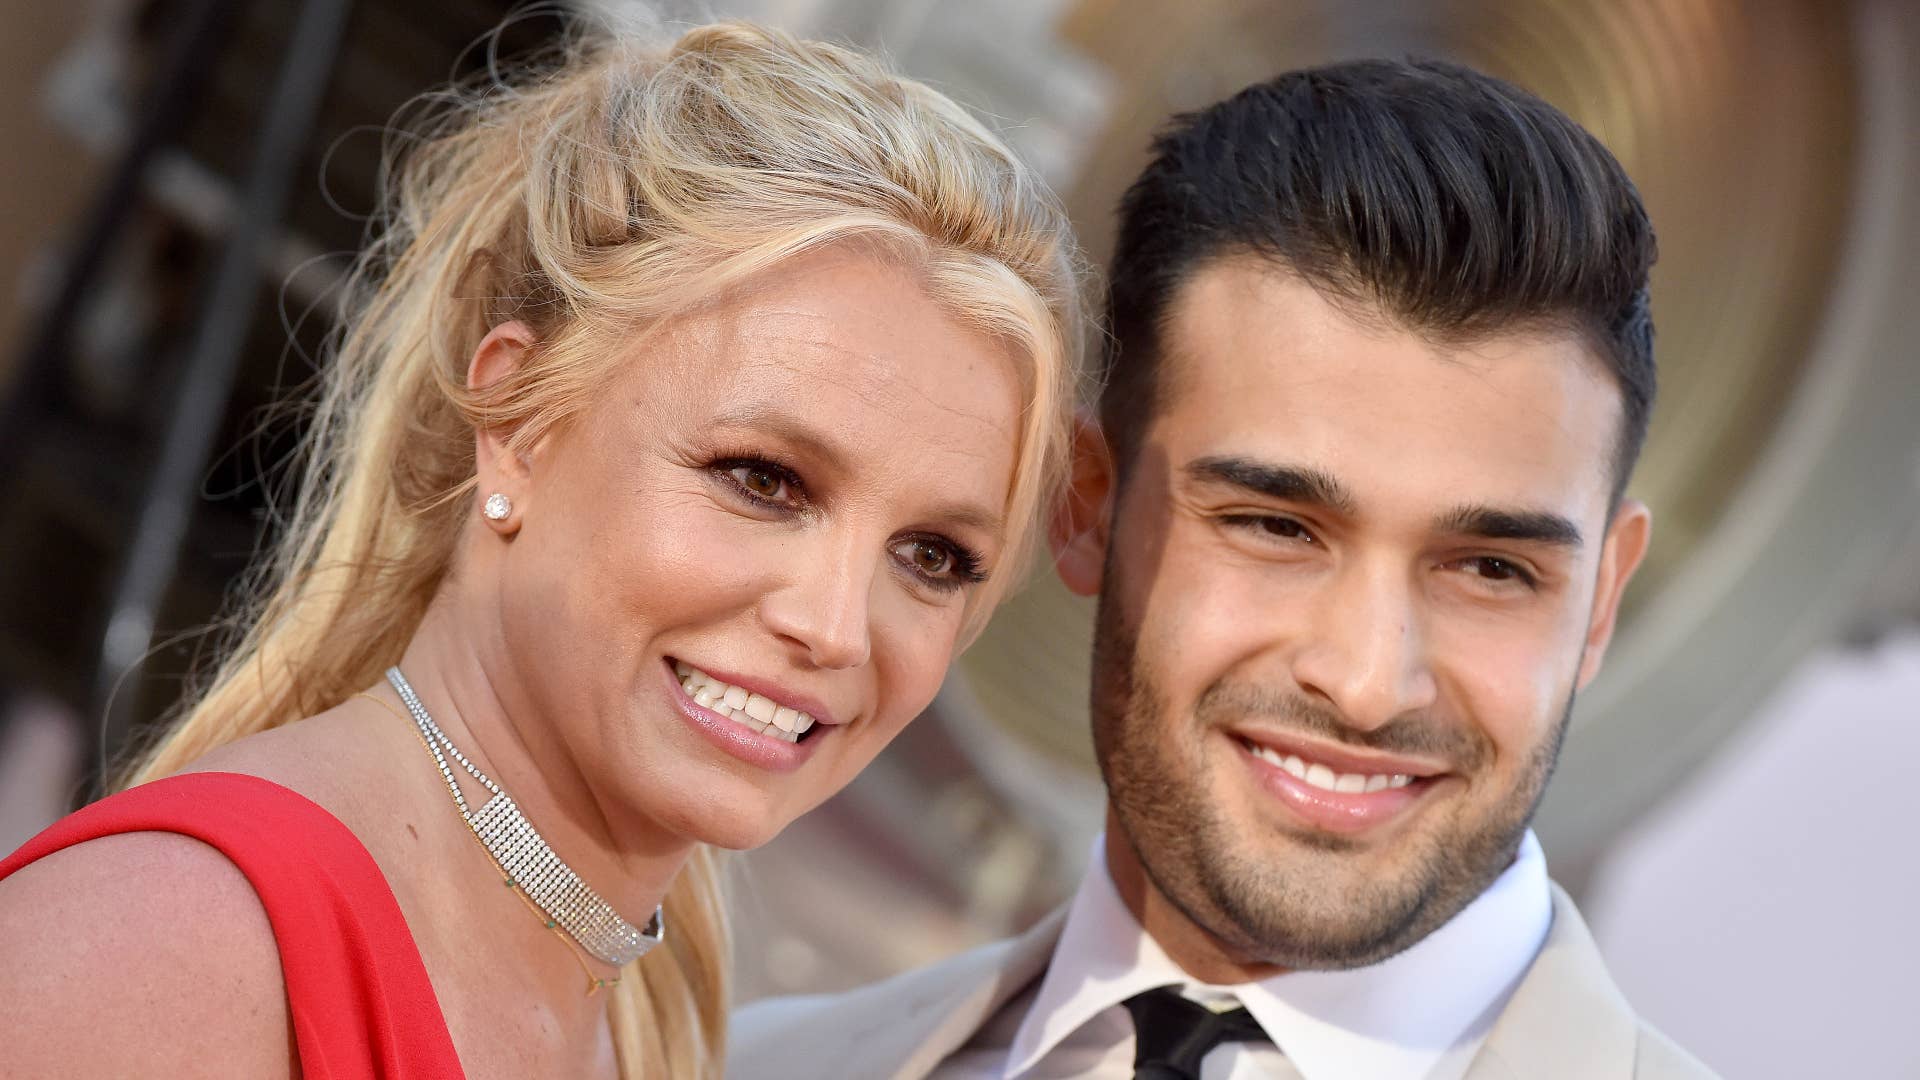 Britney Spears and Sam Asghari attend Sony Pictures' "Once Upon a Time ... in Hollywood" Los Angeles Premiere.